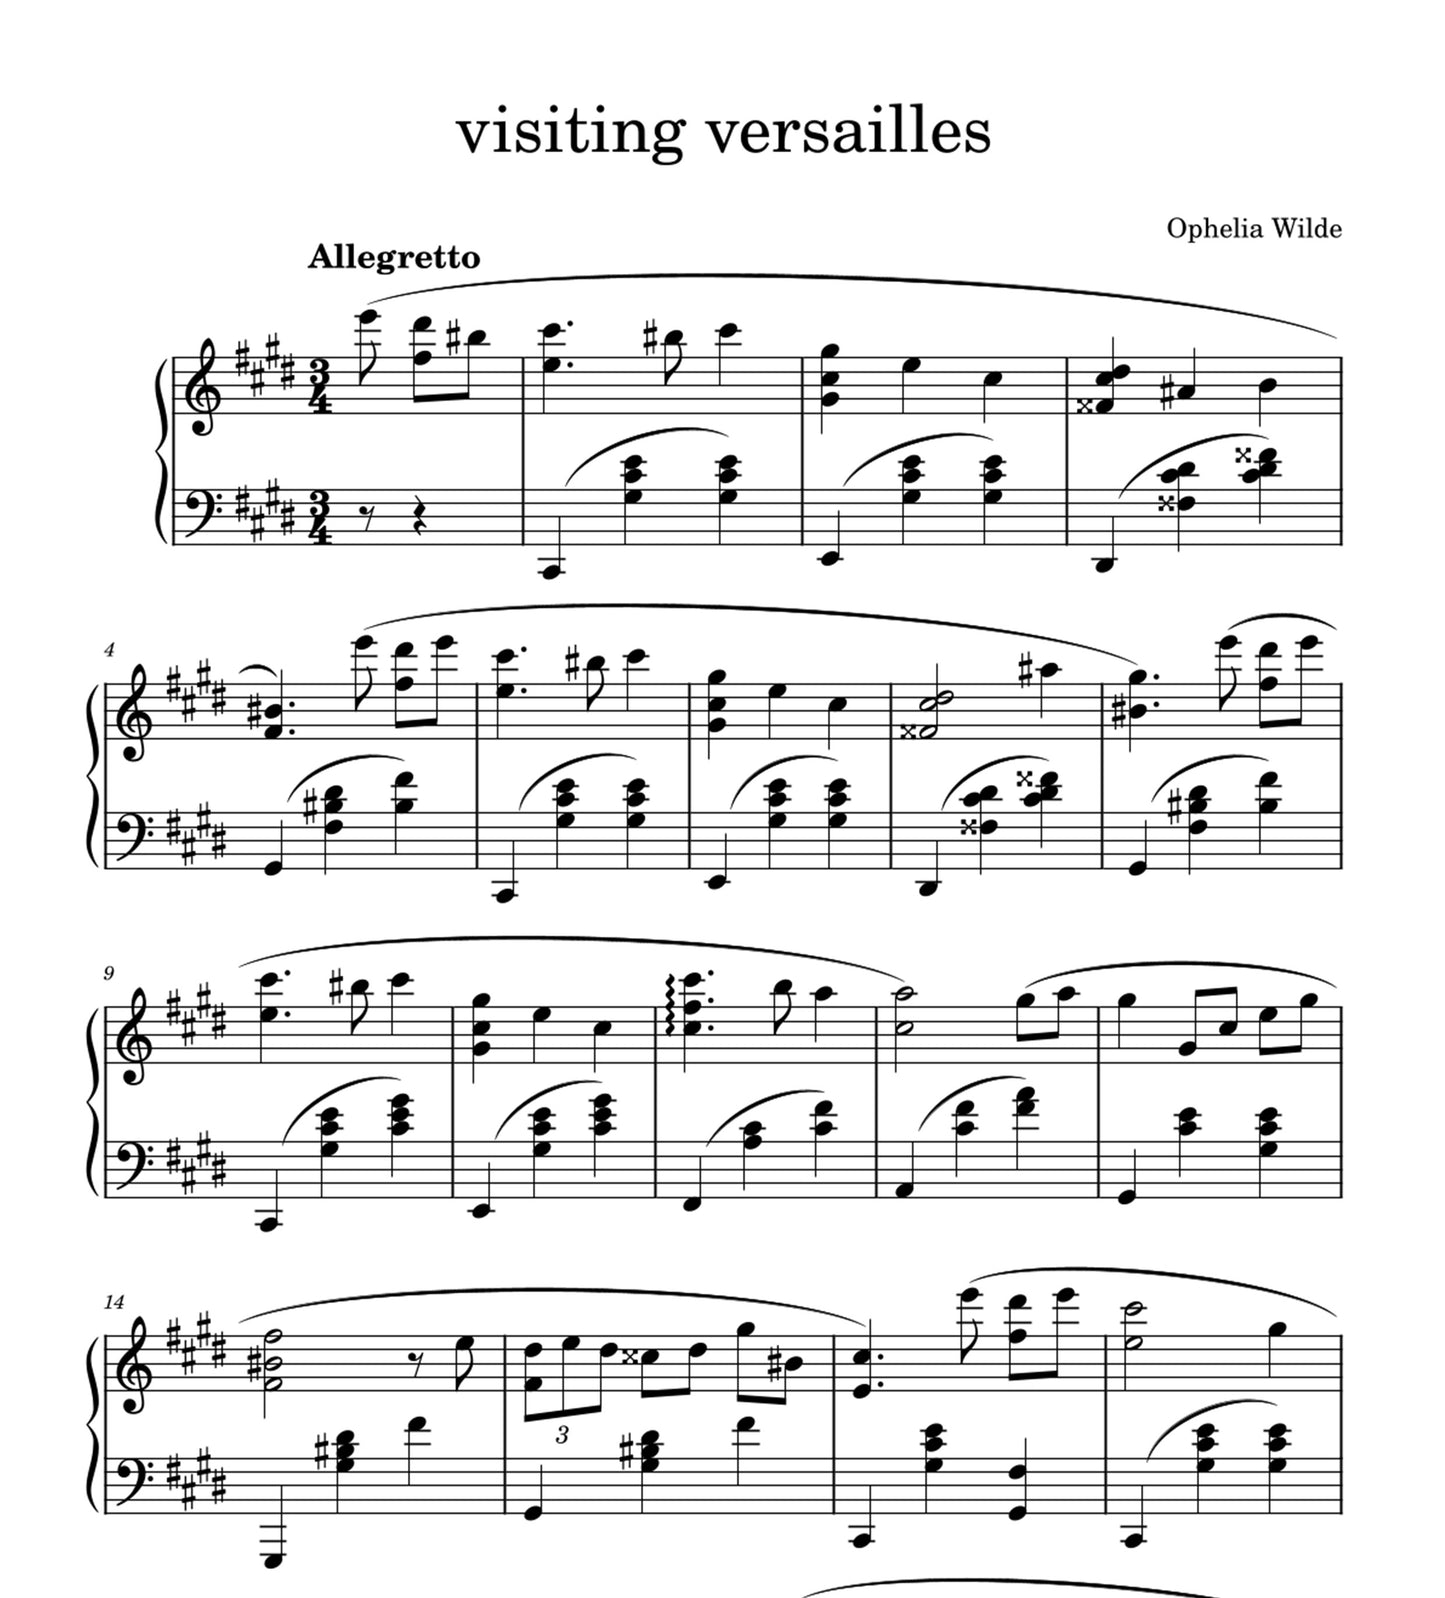 a concert for my soulmate - Complete Album Piano Sheet Music